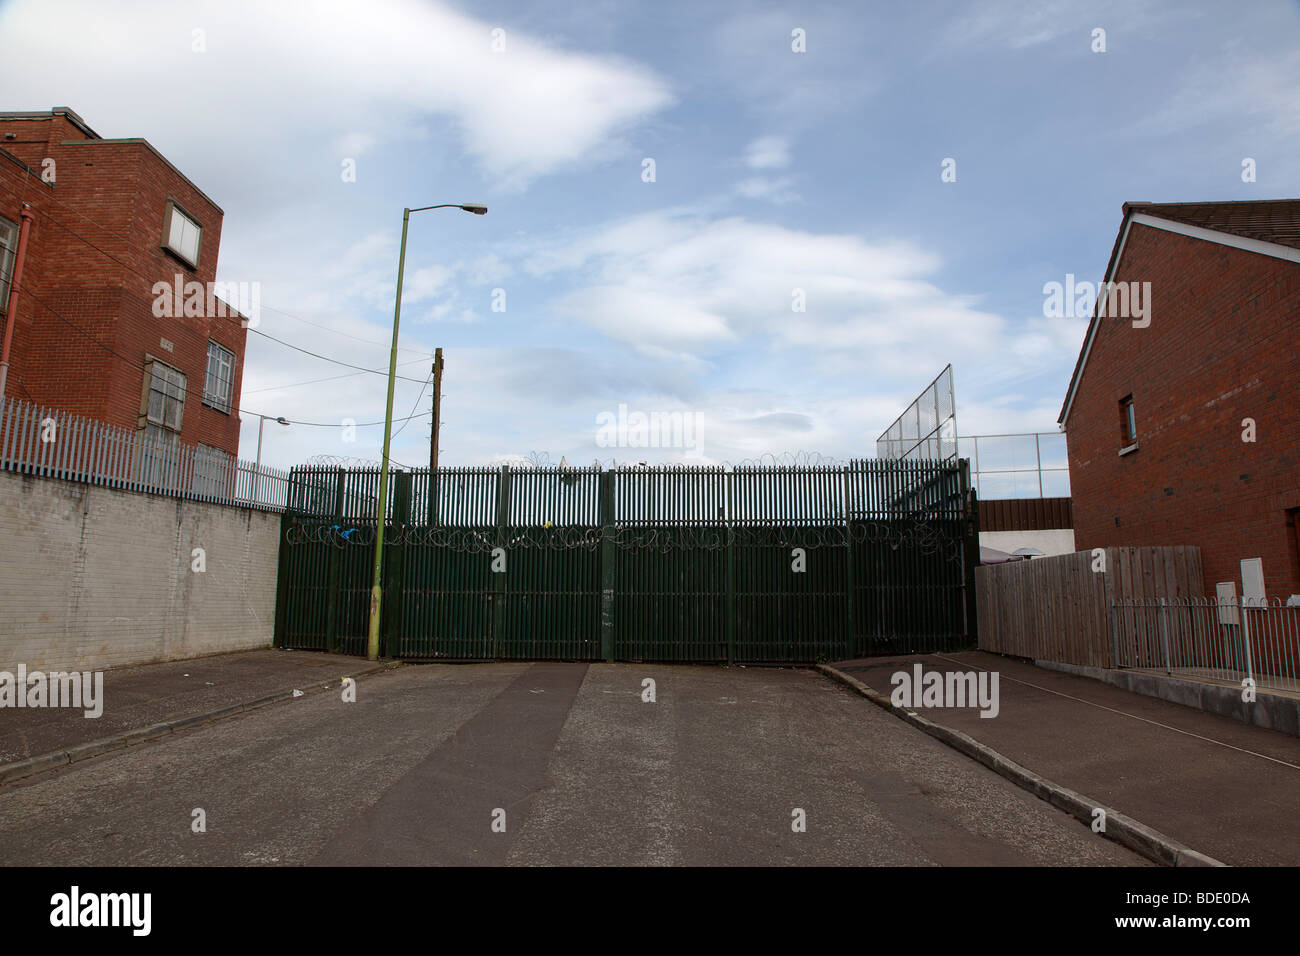 IRELAND, North, Belfast, West, Falls Road, Peace Line barrier between the Catholic Lower Falls and Protestant Shankill areas. Stock Photo